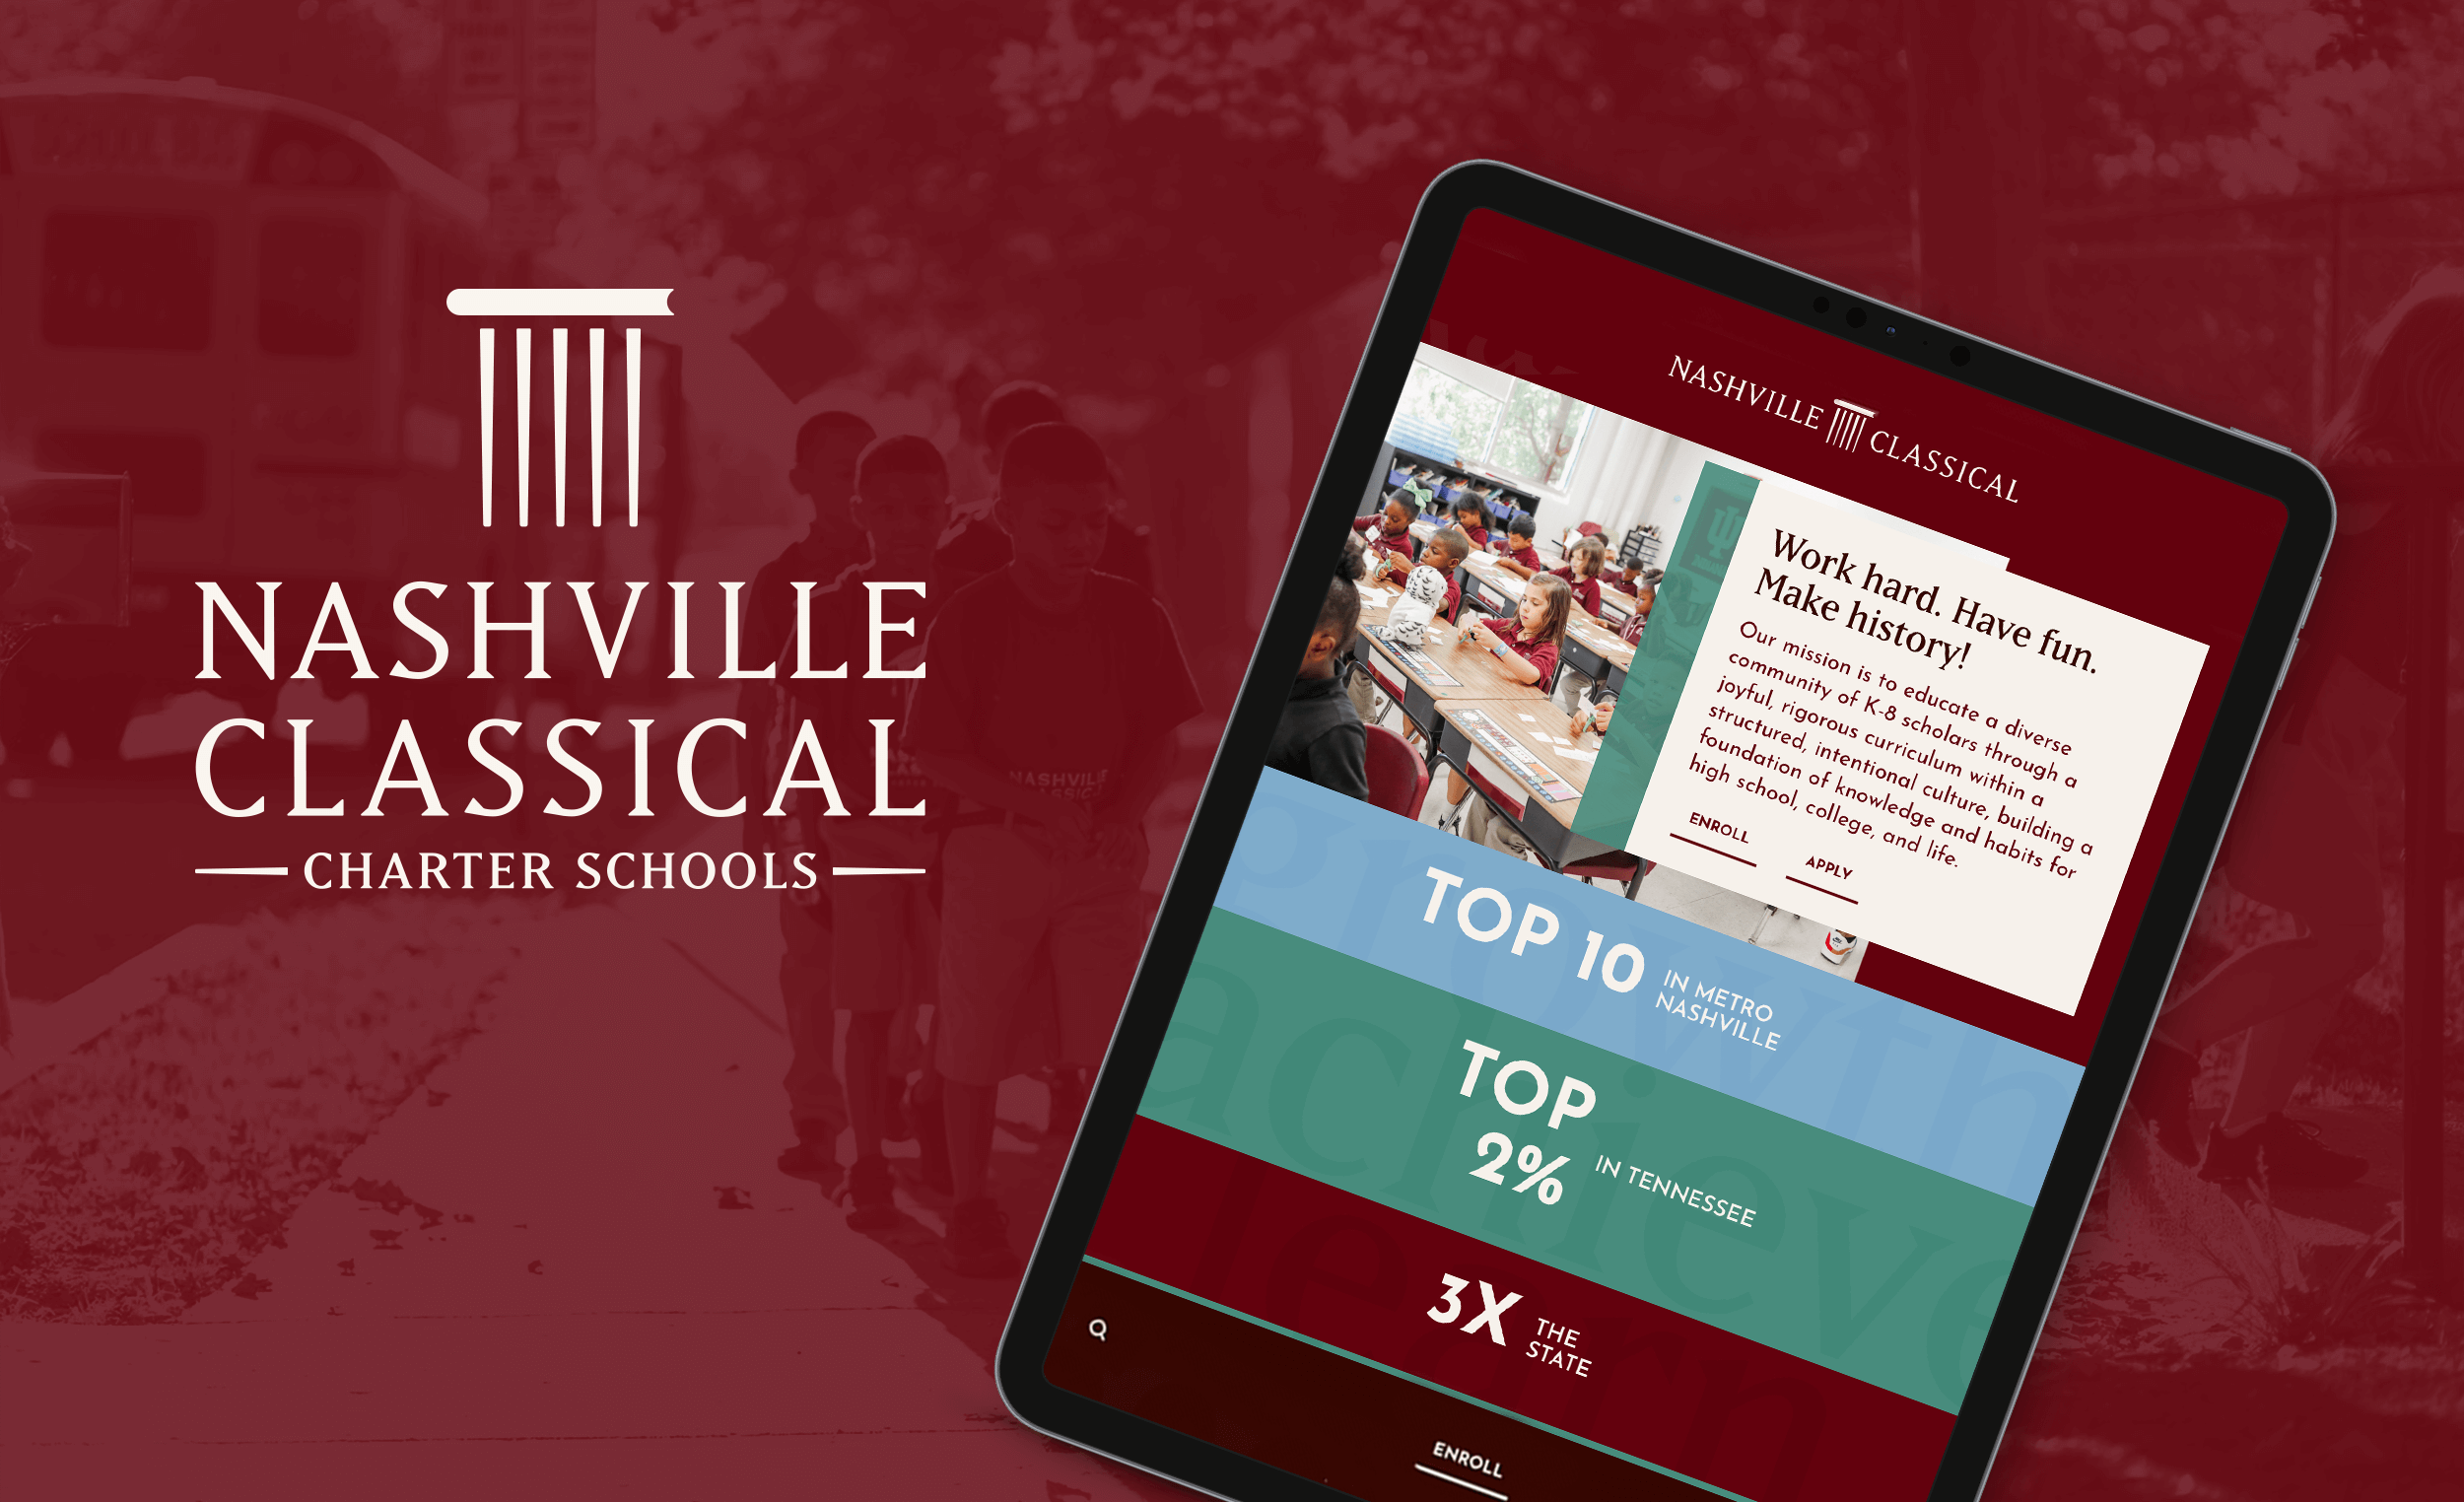 Nashville Classical Charter School website design and refreshed branding by ST8MNT